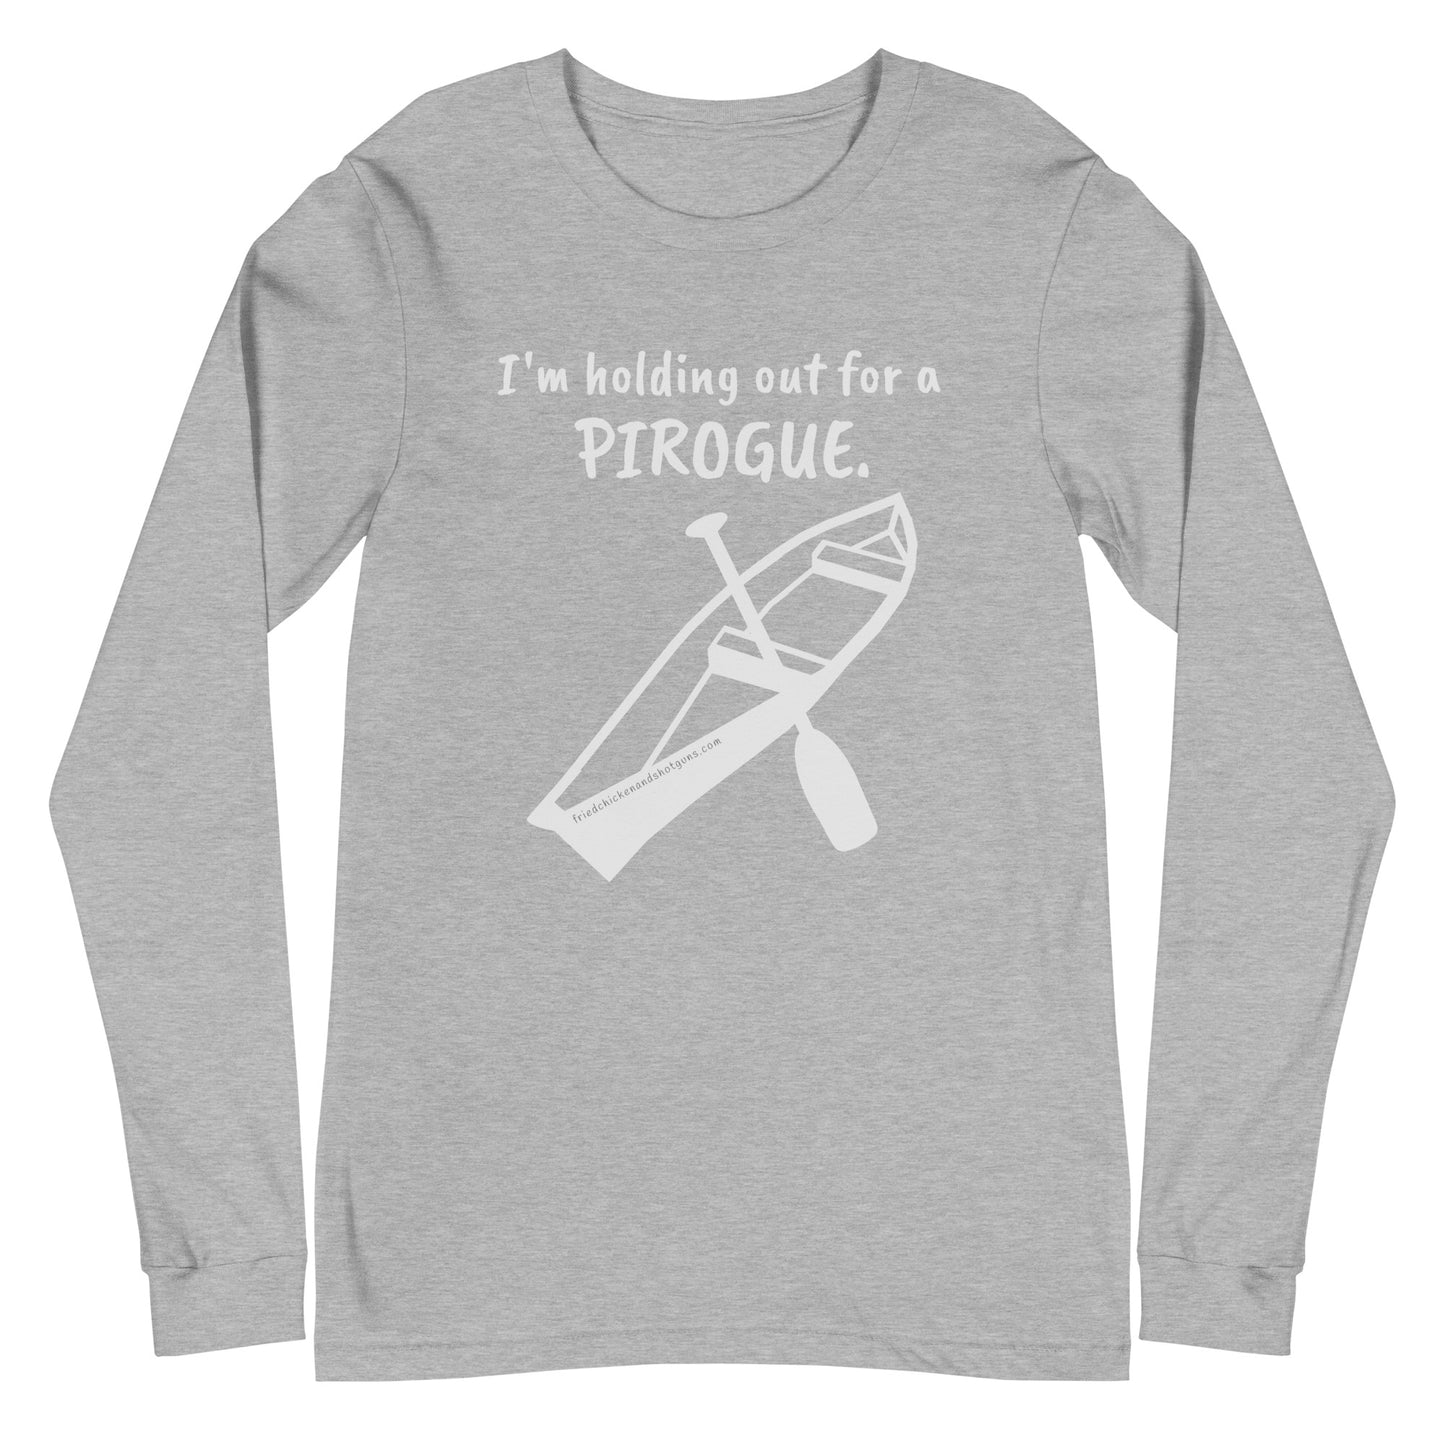 Holding out for a PIROGUE (long sleeve/light logo)